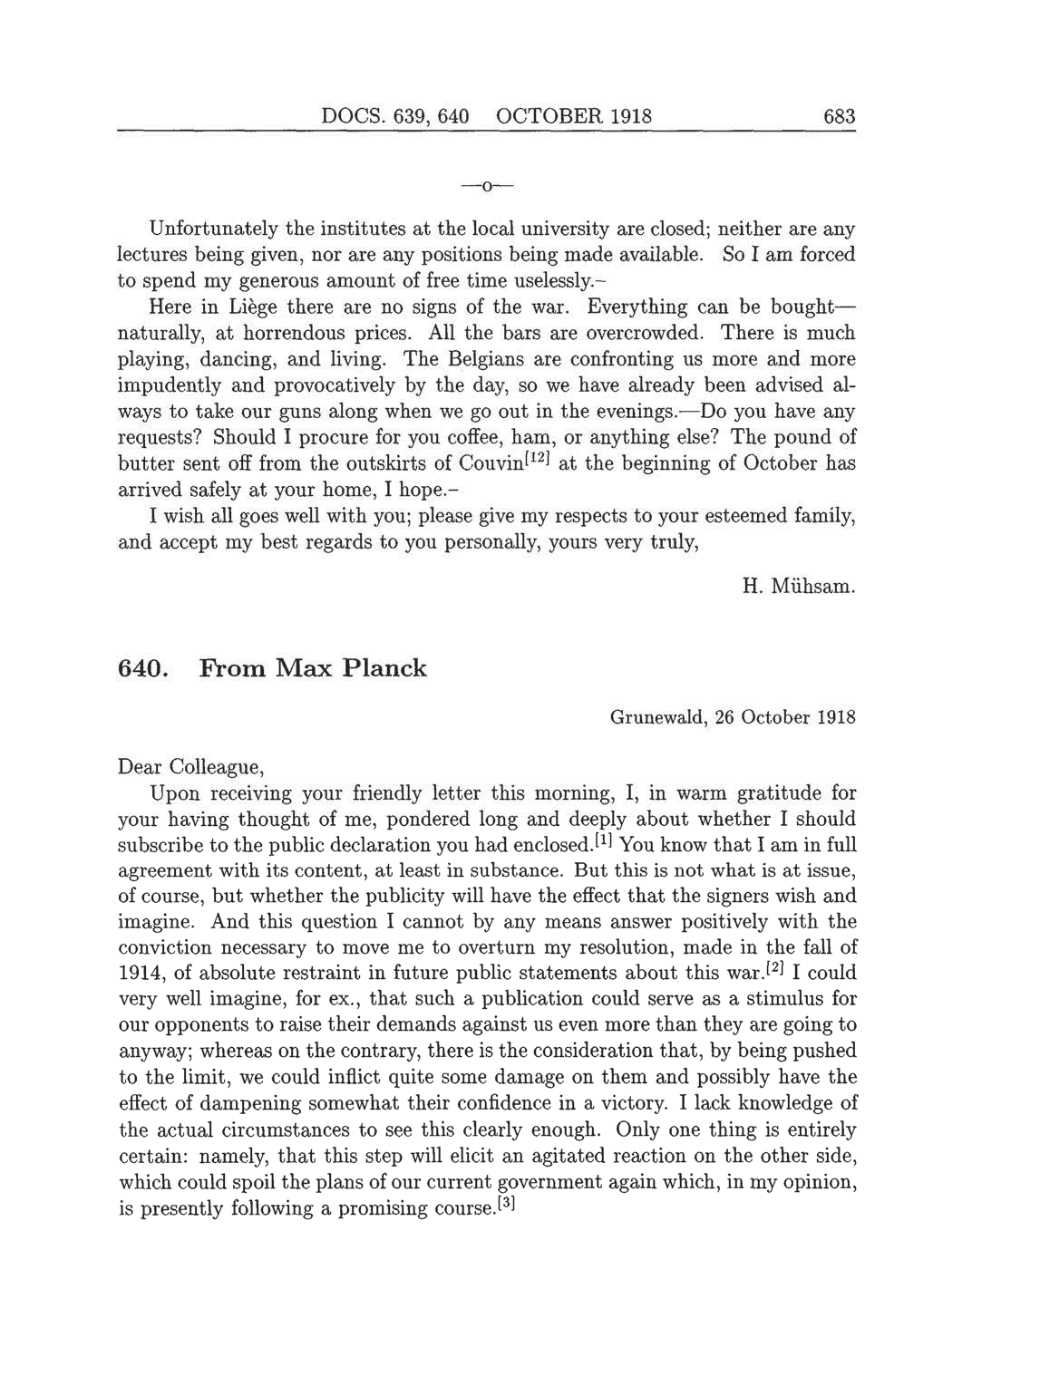 Volume 8: The Berlin Years: Correspondence, 1914-1918 (English translation supplement) page 683